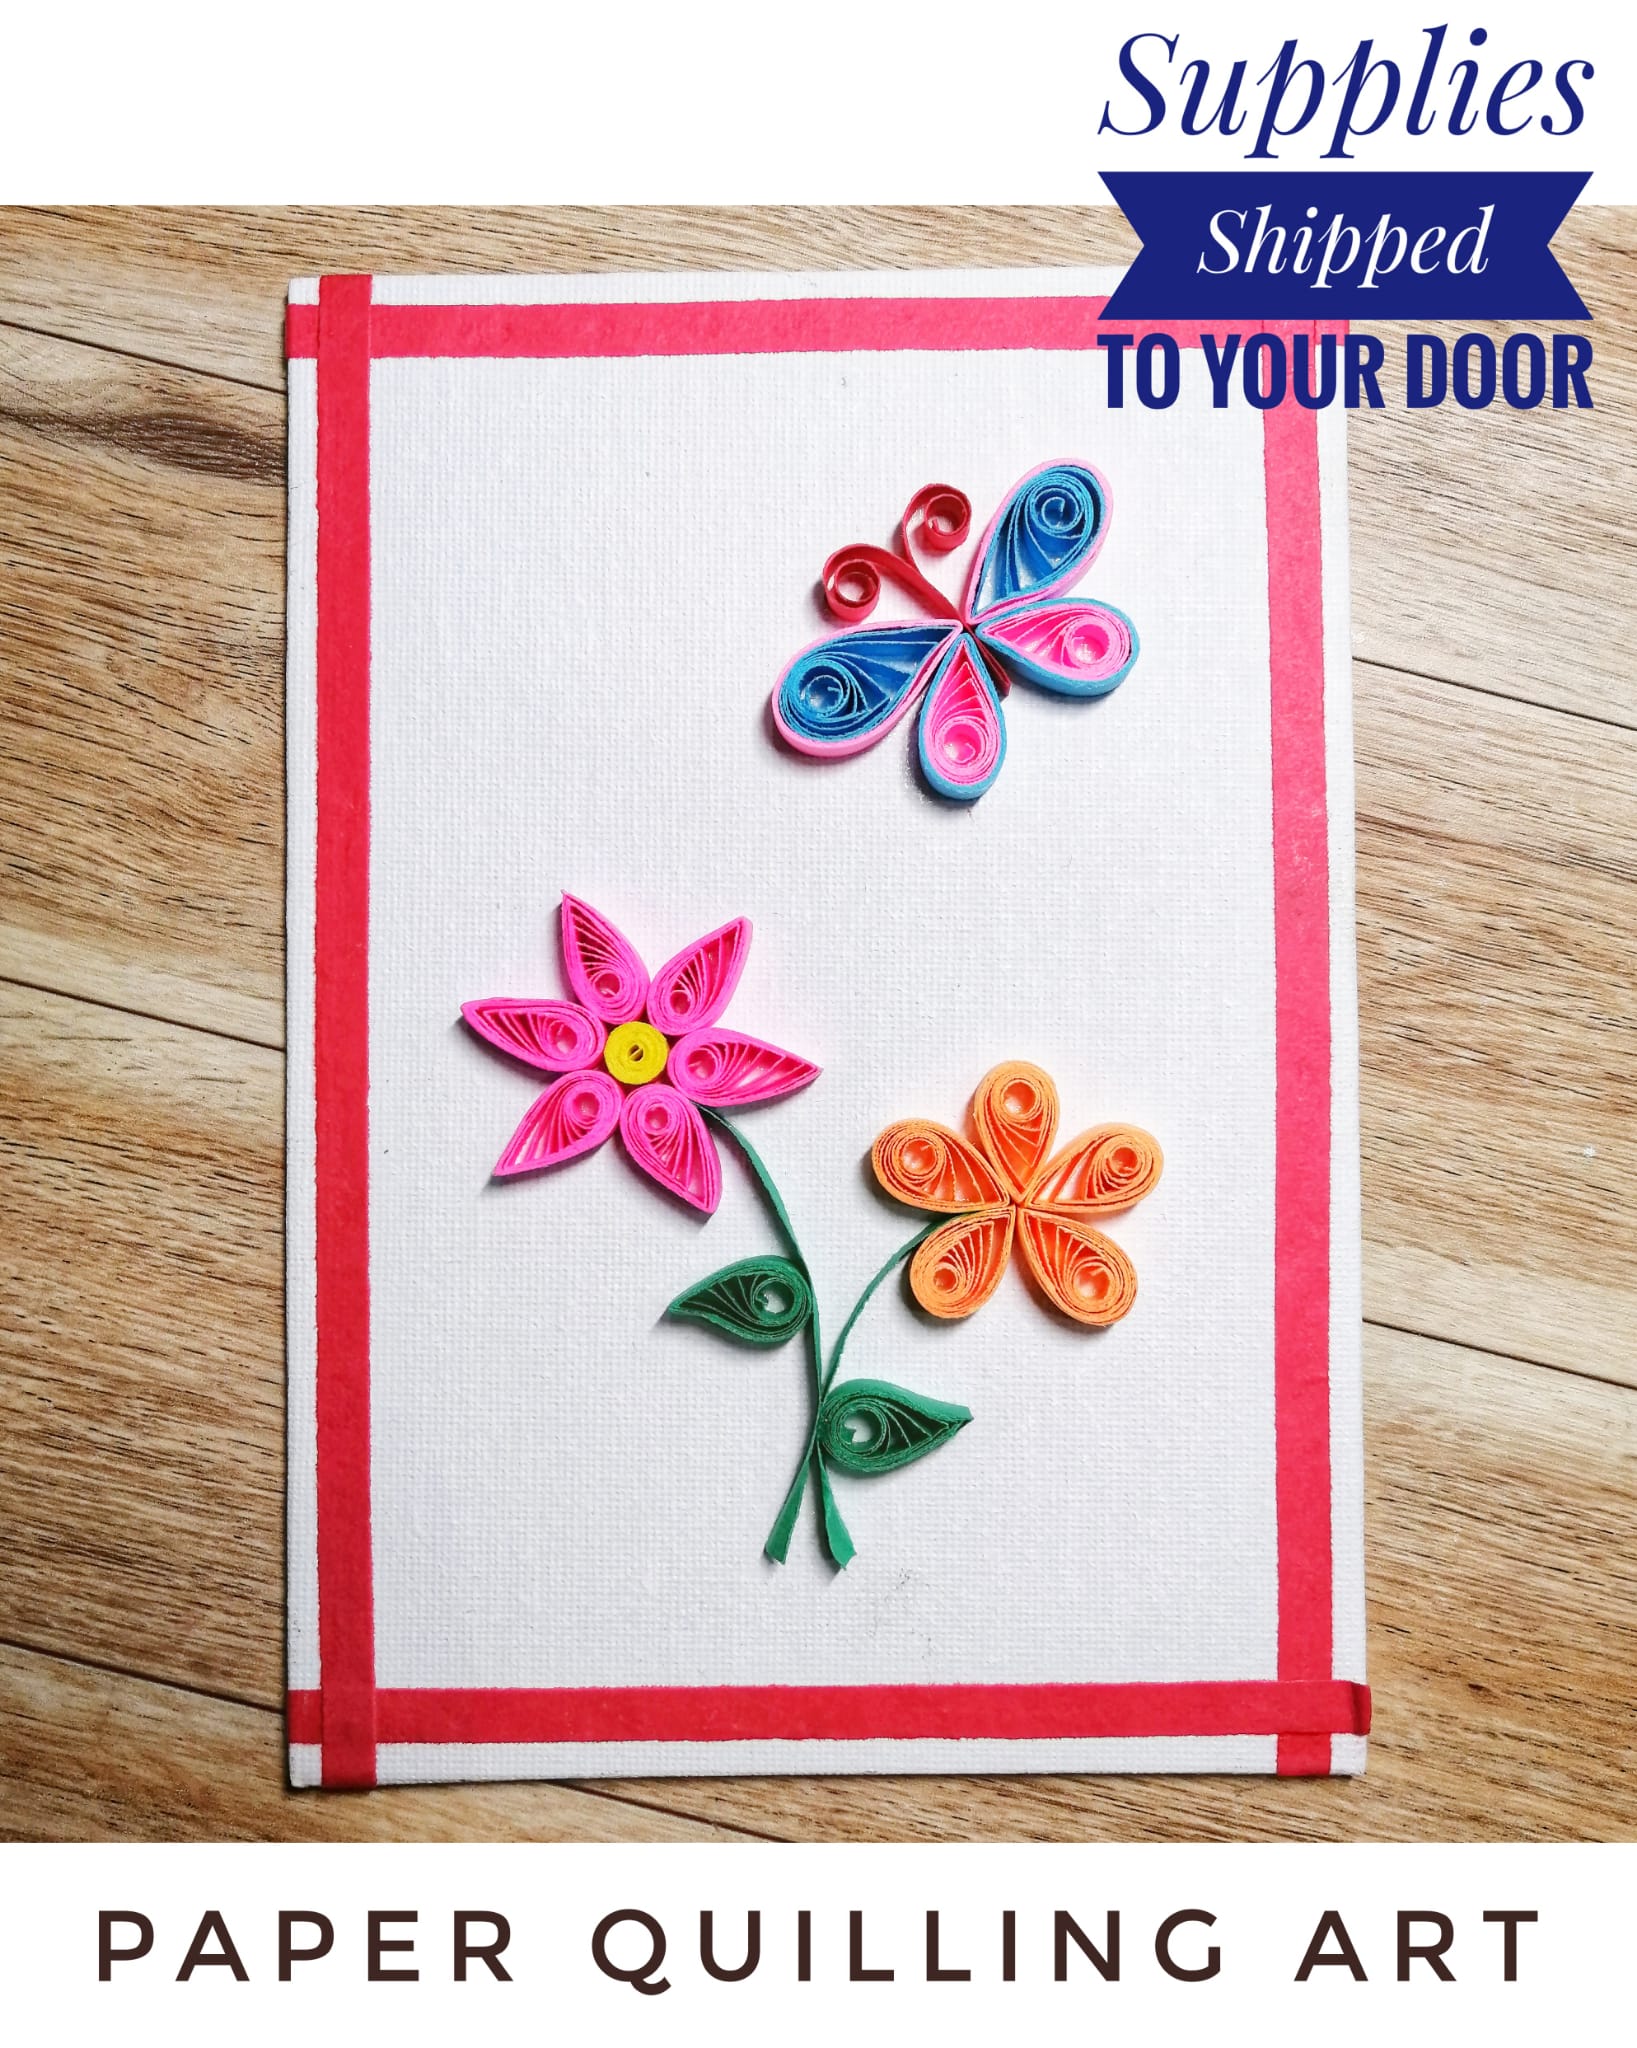 A Paper Quilling  Spring is Here Supplies Included experience project by Yaymaker